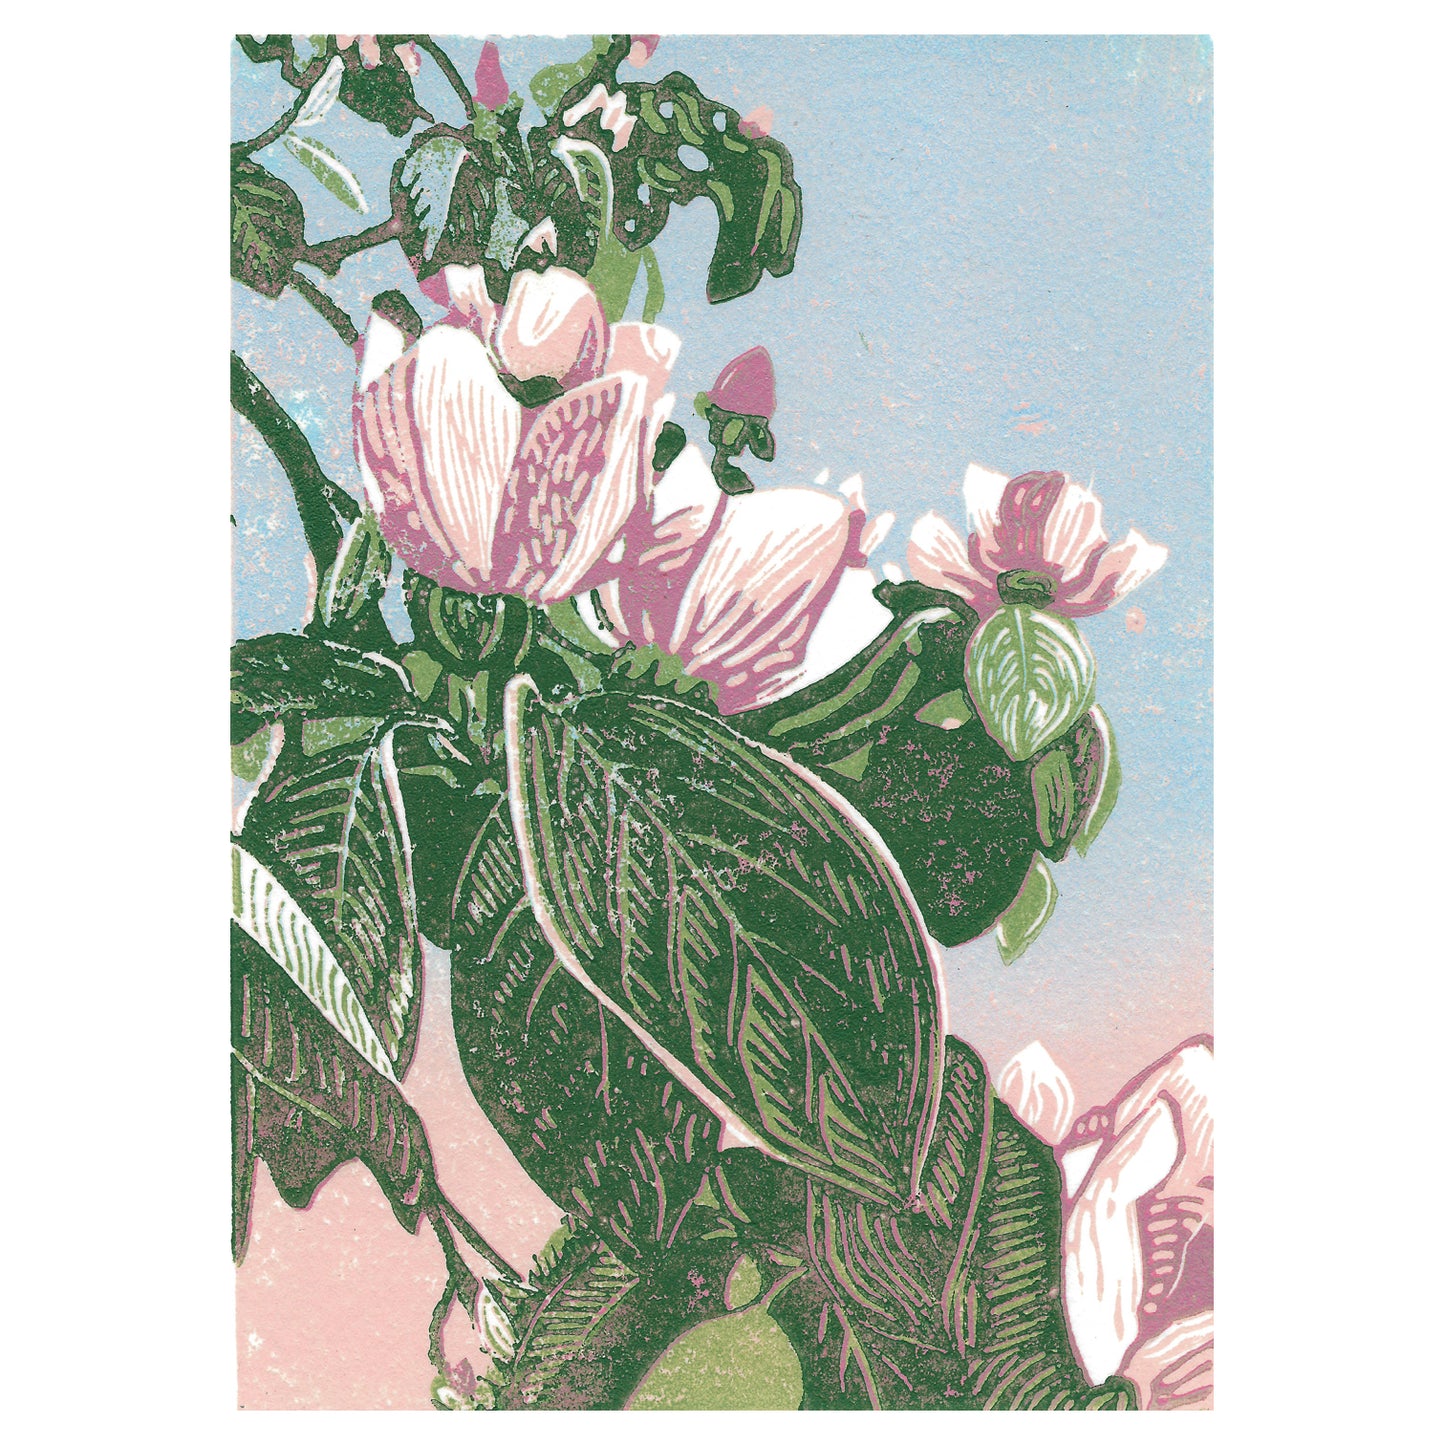 Flower art by printmaker Natalia Wohletz of Peninsular Prints titled En el Jardin. Inspired by a Mackinac Island garden.  A reduction block print carved and printed in Michigan.